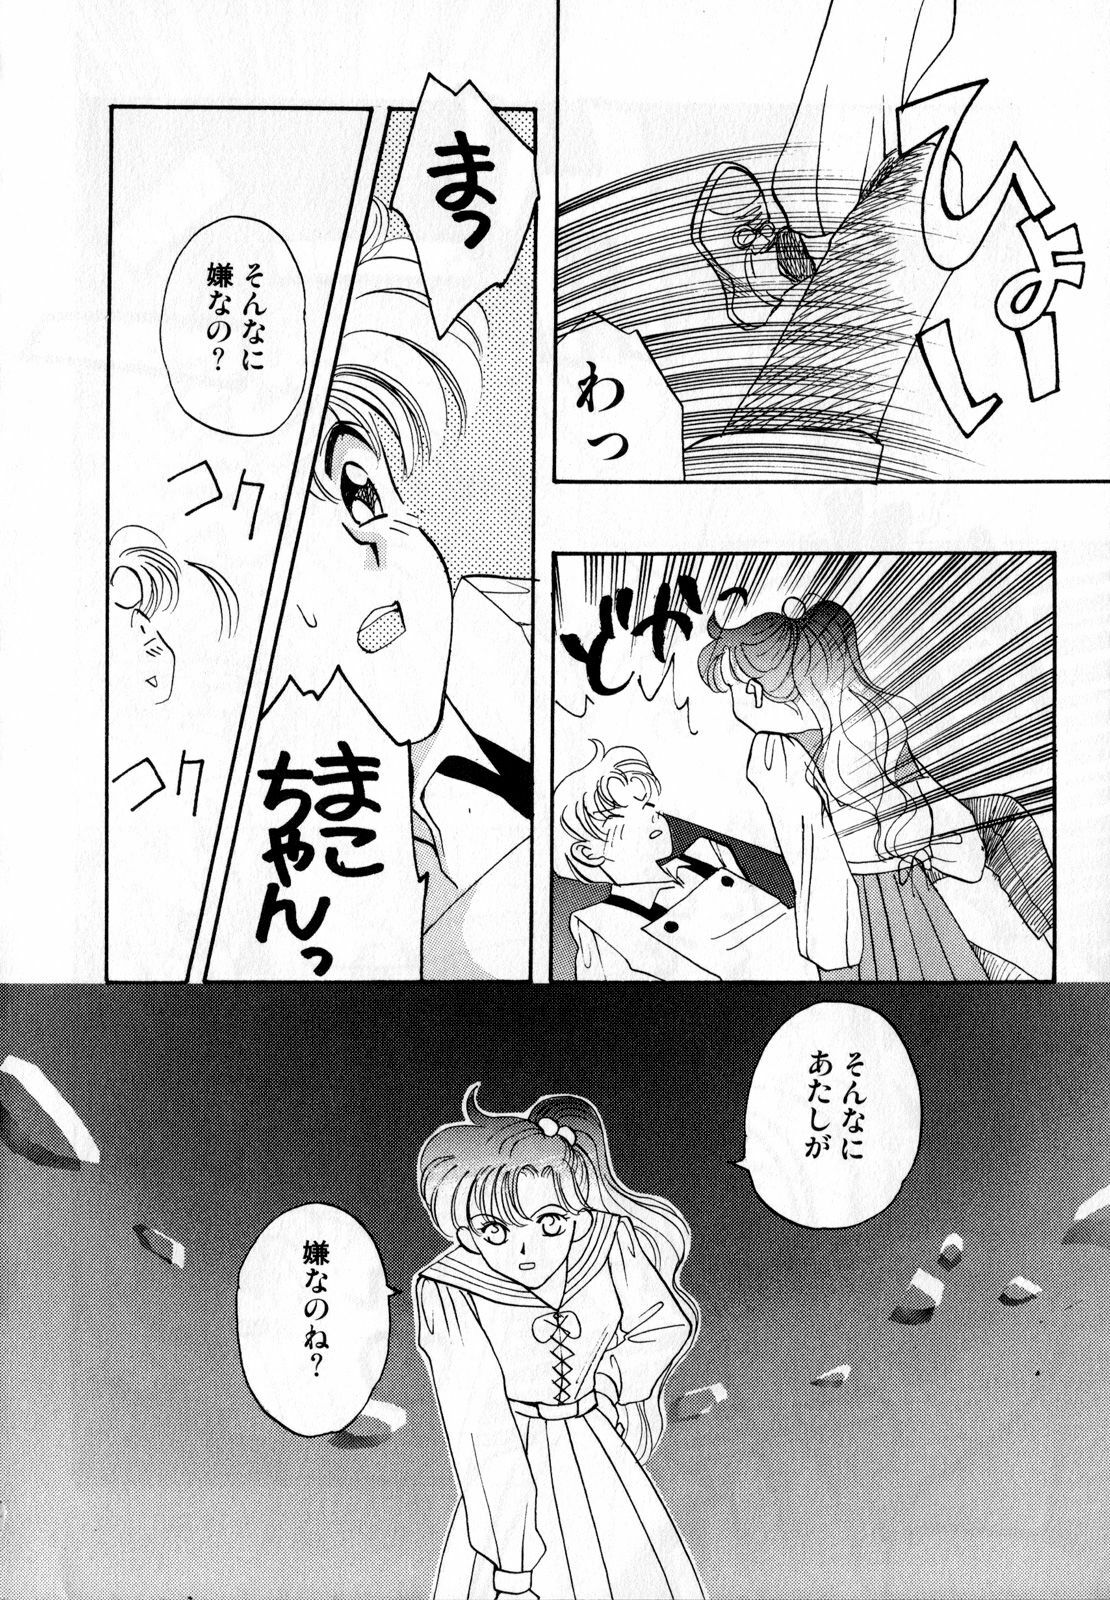 [Anthology] Lunatic Party 2 (Sailor Moon) page 17 full